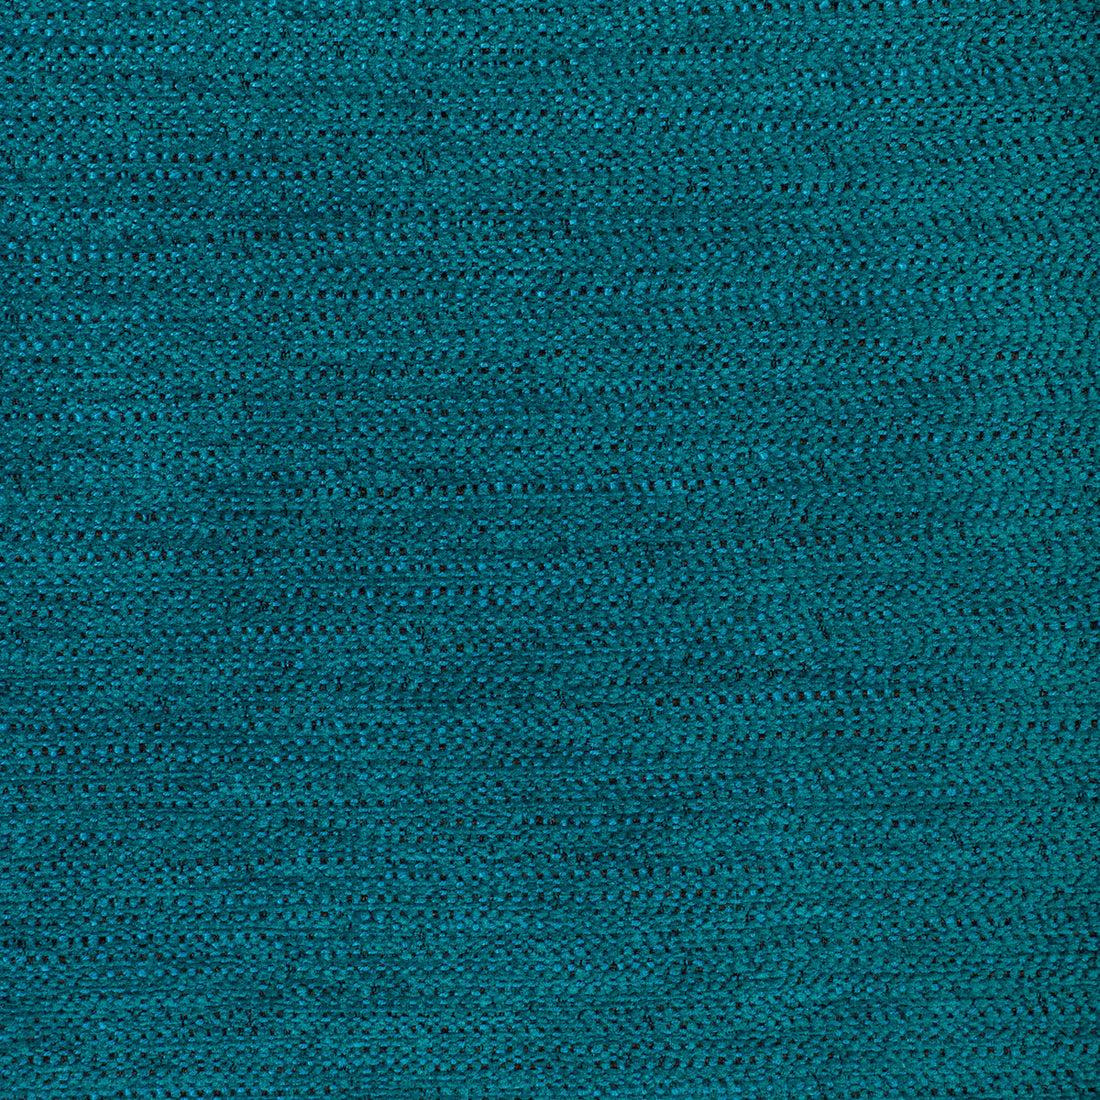 Recoup fabric in reef color - pattern 36569.35.0 - by Kravet Contract in the Seaqual collection